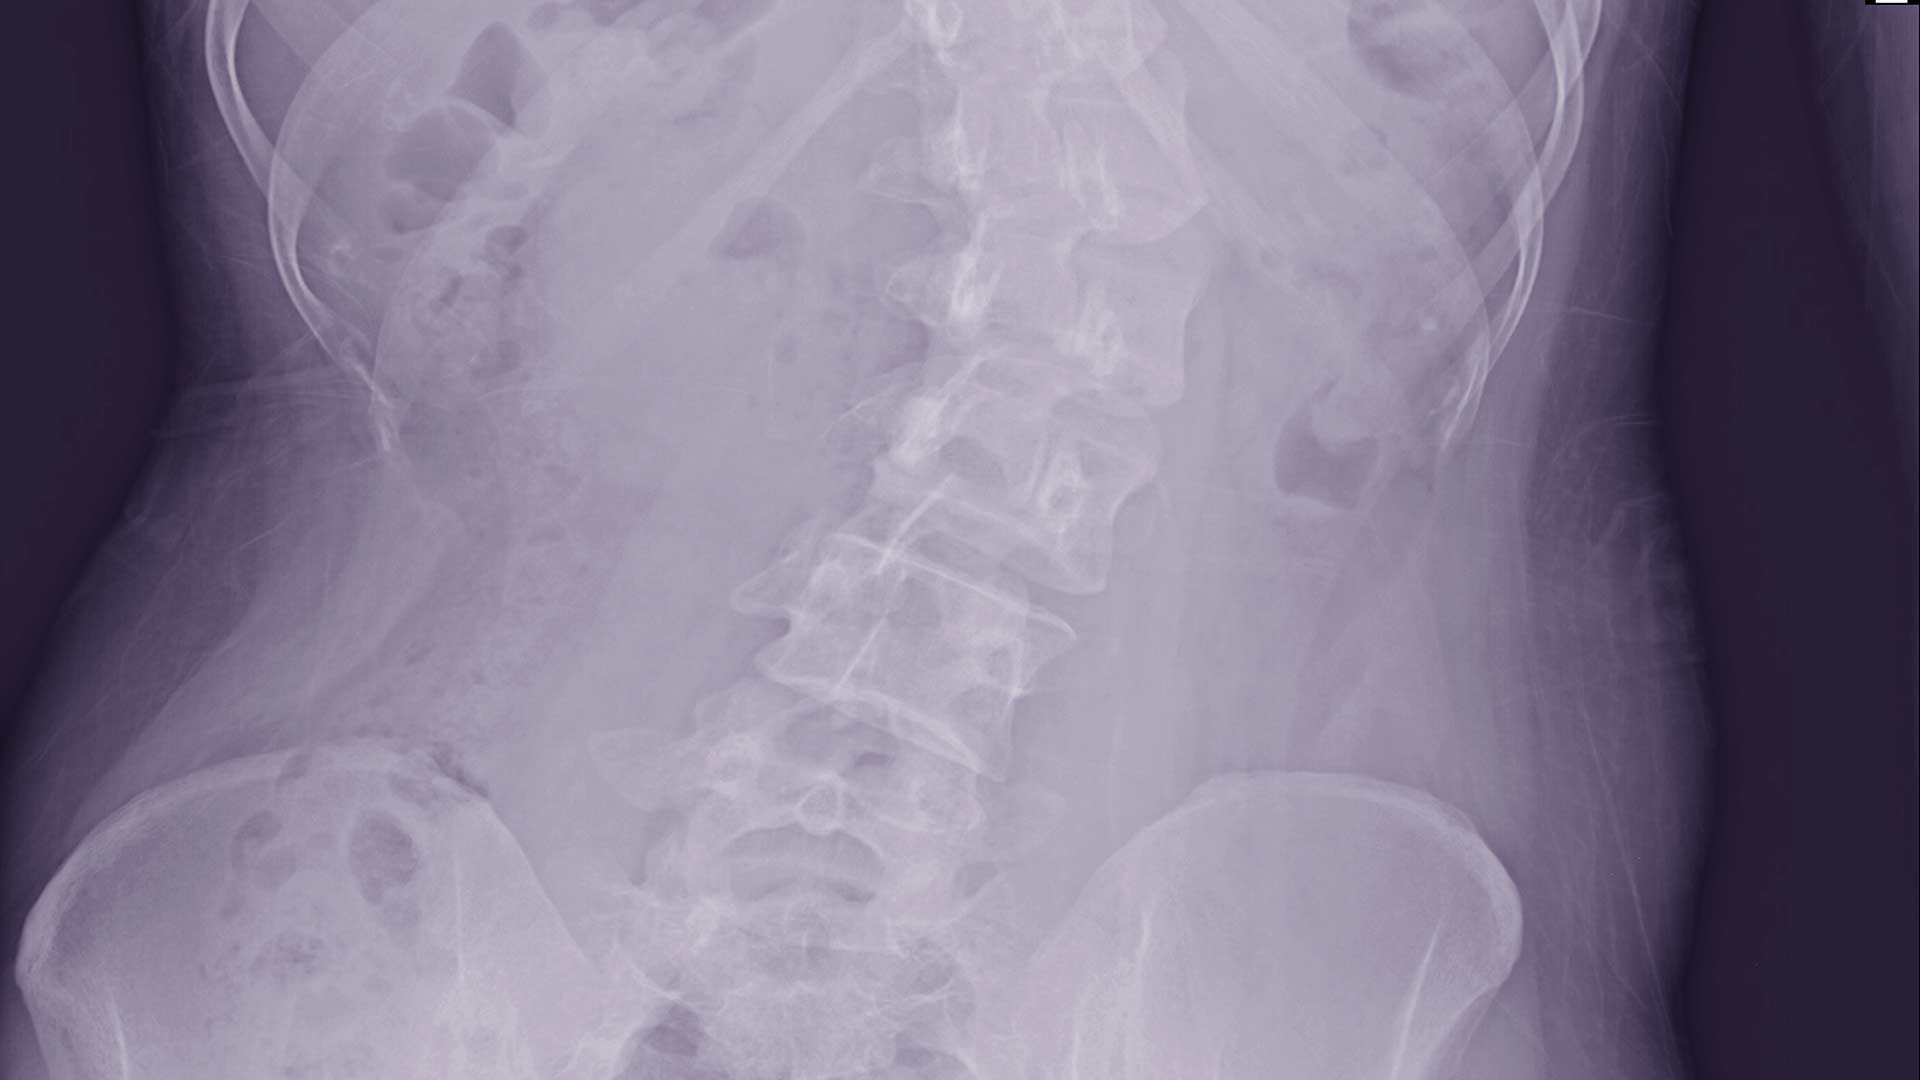 Why Schools Should Be Screening Children for Scoliosis